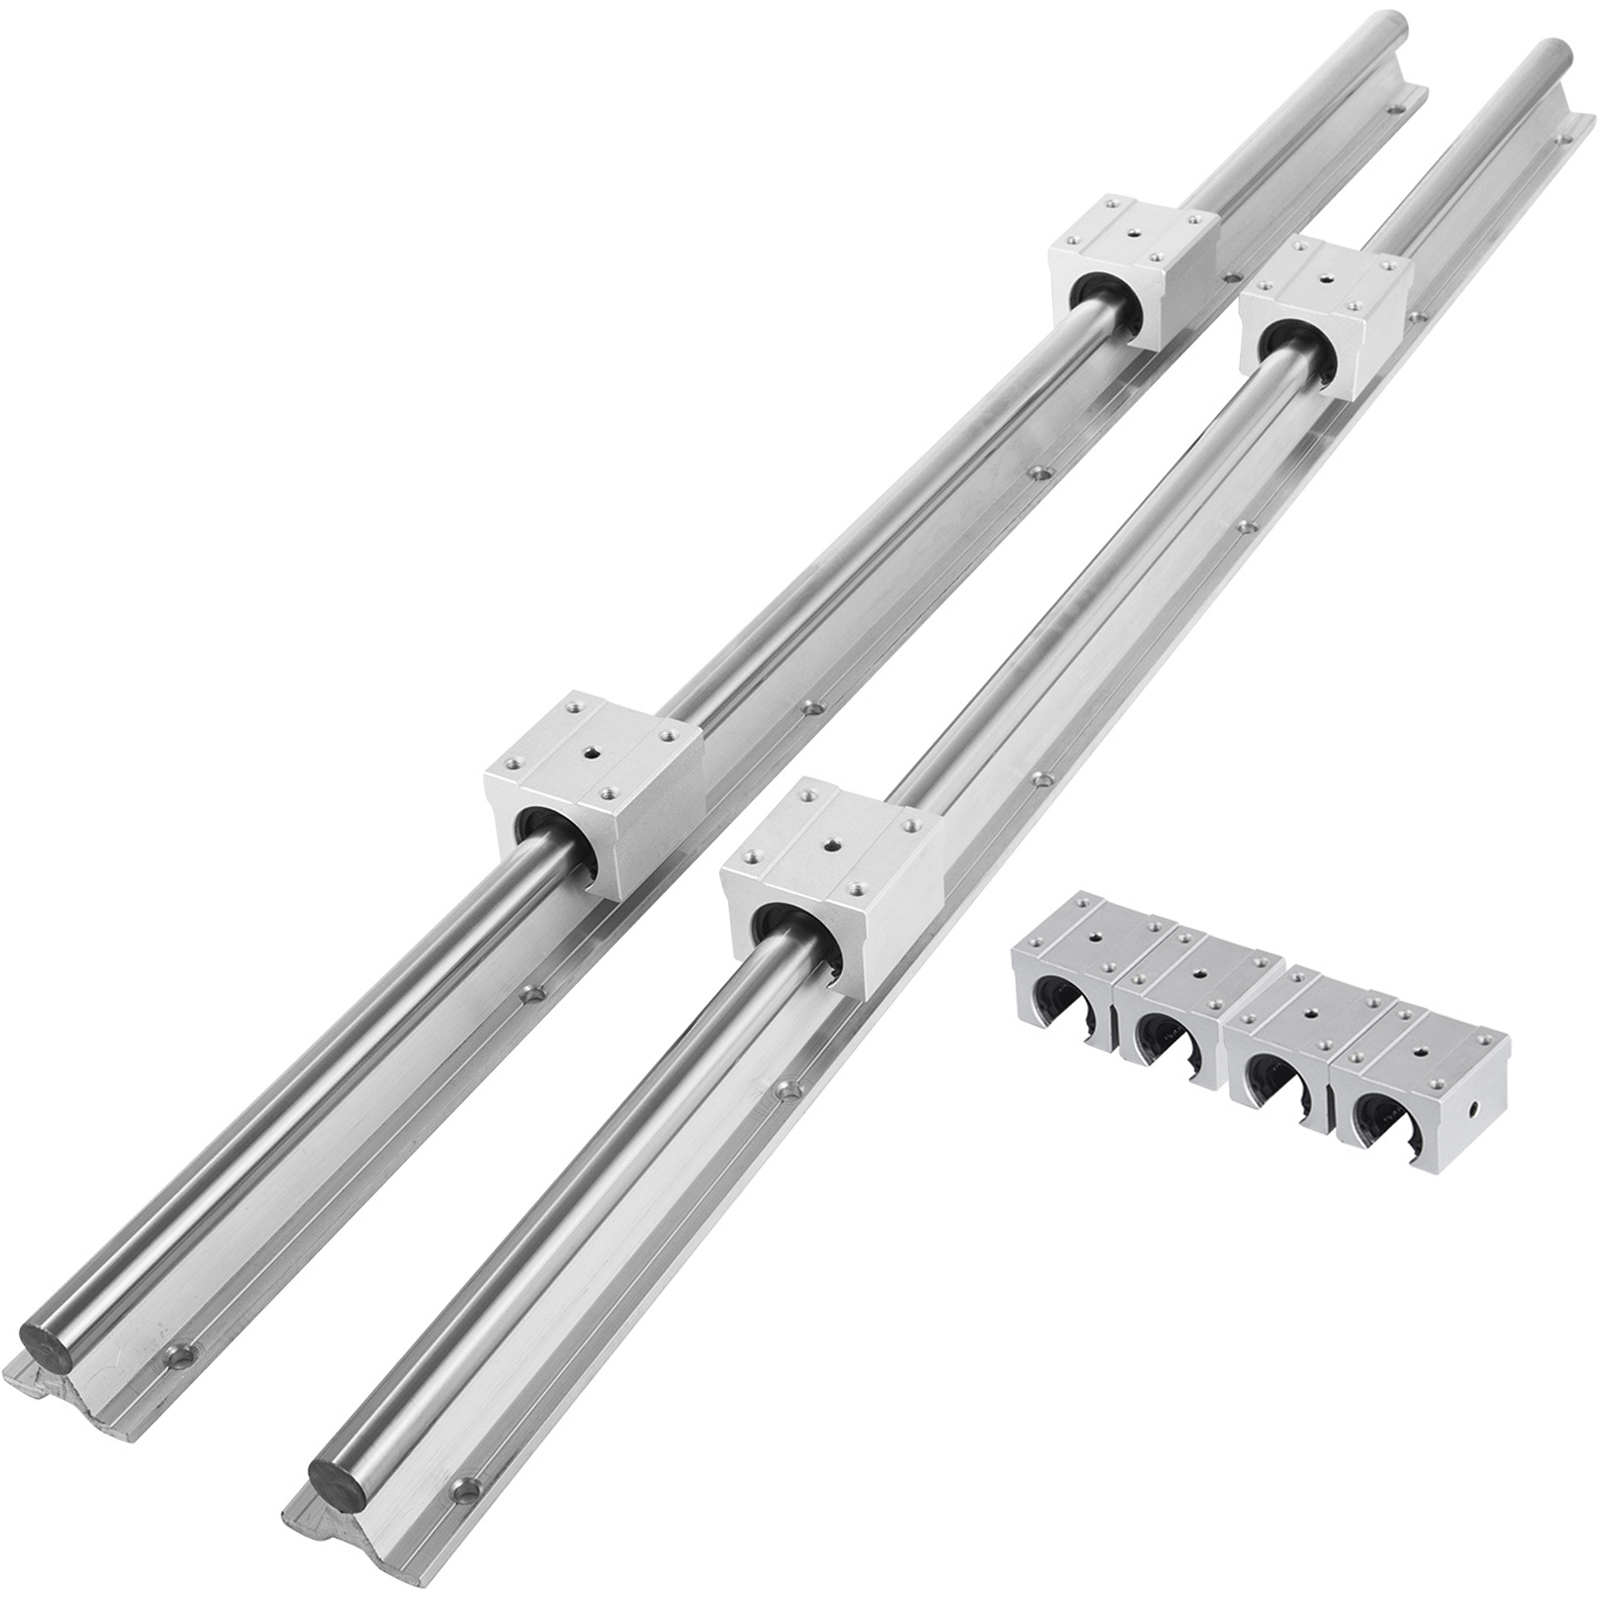 20mm Linearführung Linear Rail Guide 500mm for CNC Machine &Carriages Lagerblock 